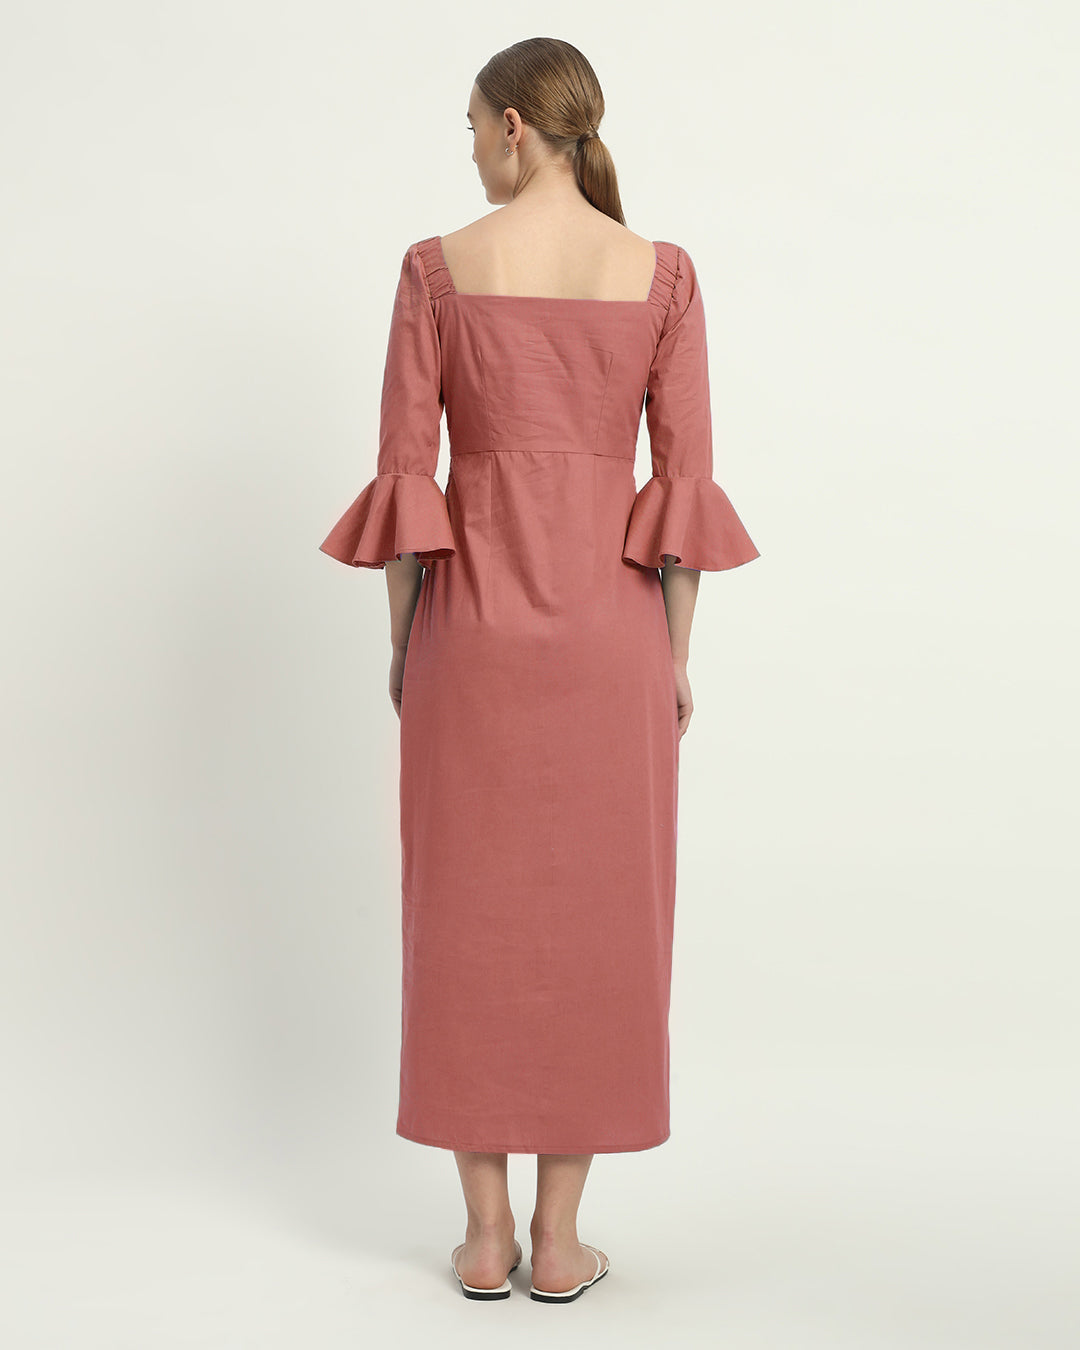 The Rosendale  Ivory Pink Cotton Dress